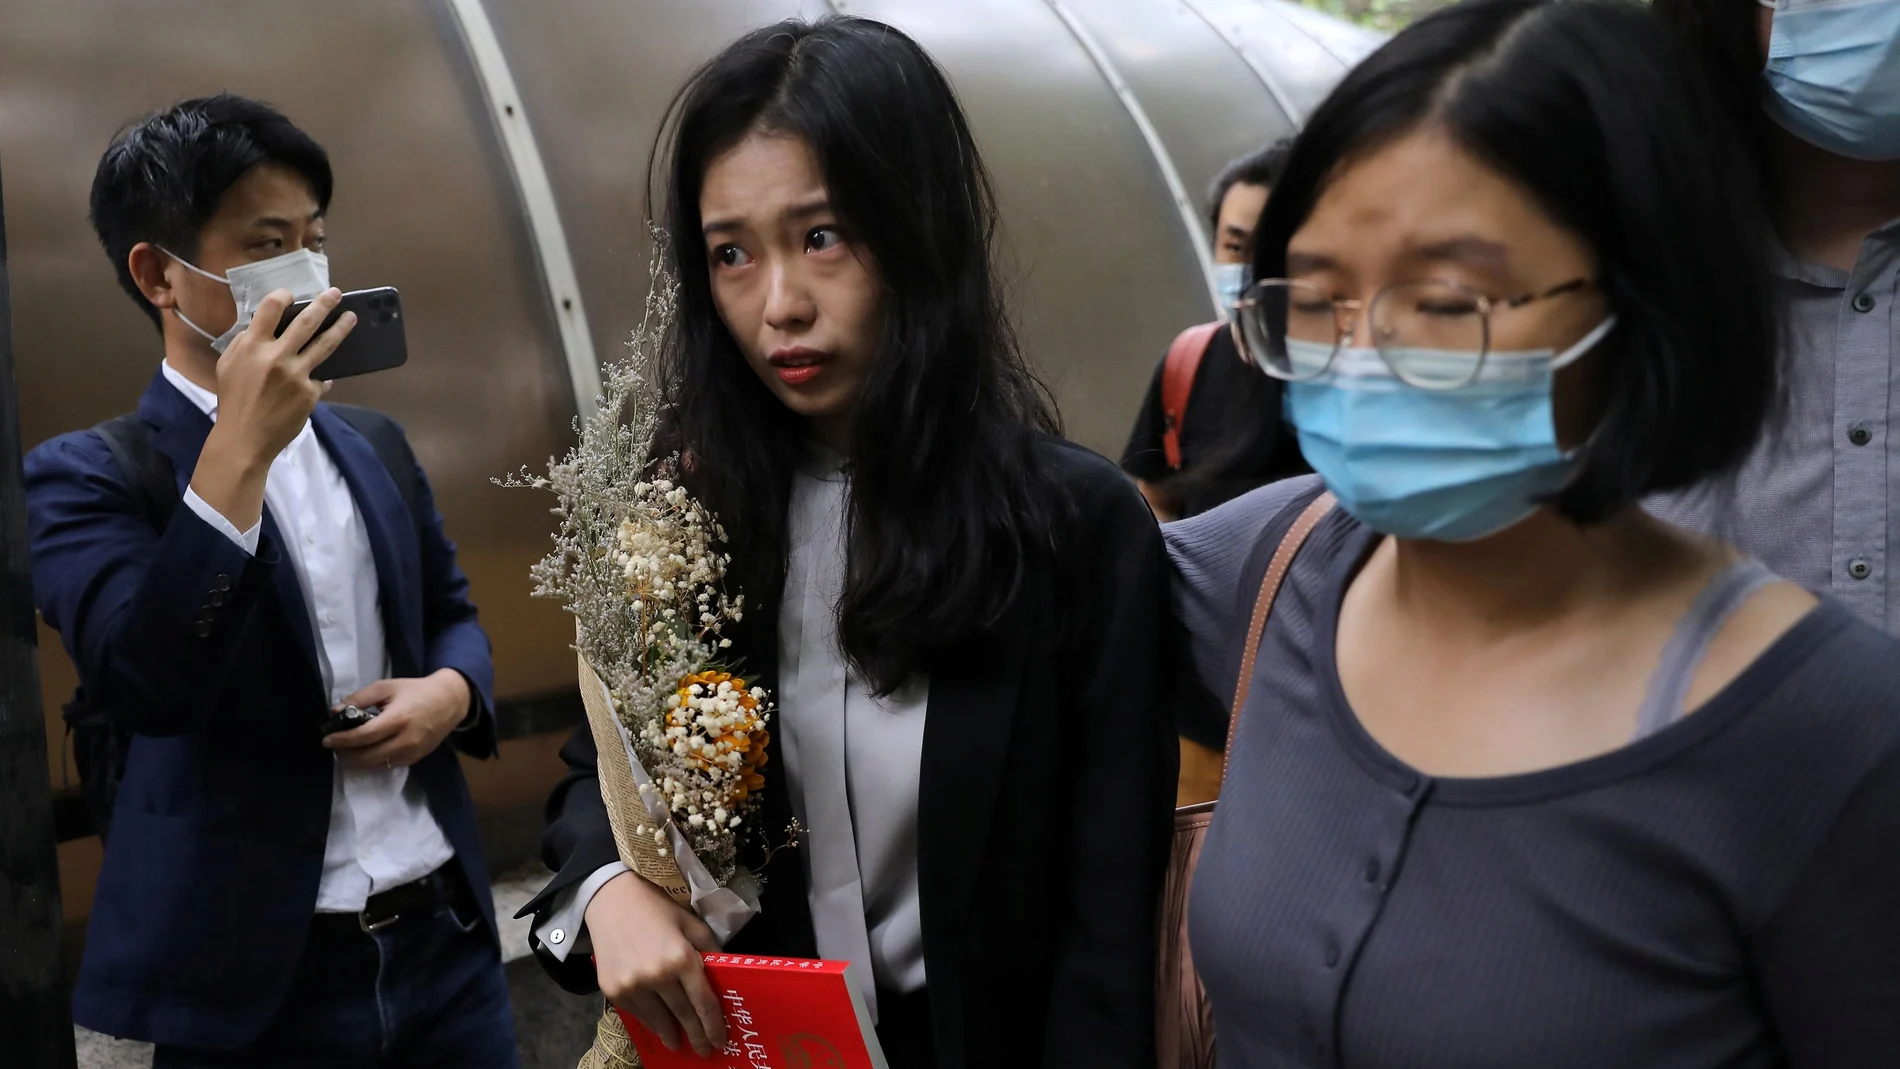 Zhou Xiaoxuan, also known by her online name Xianzi, arrives at a court for a sexual harassment case involving a Chinese state TV host, in Beijing, China September 14, 2021. REUTERS/Tingshu Wang